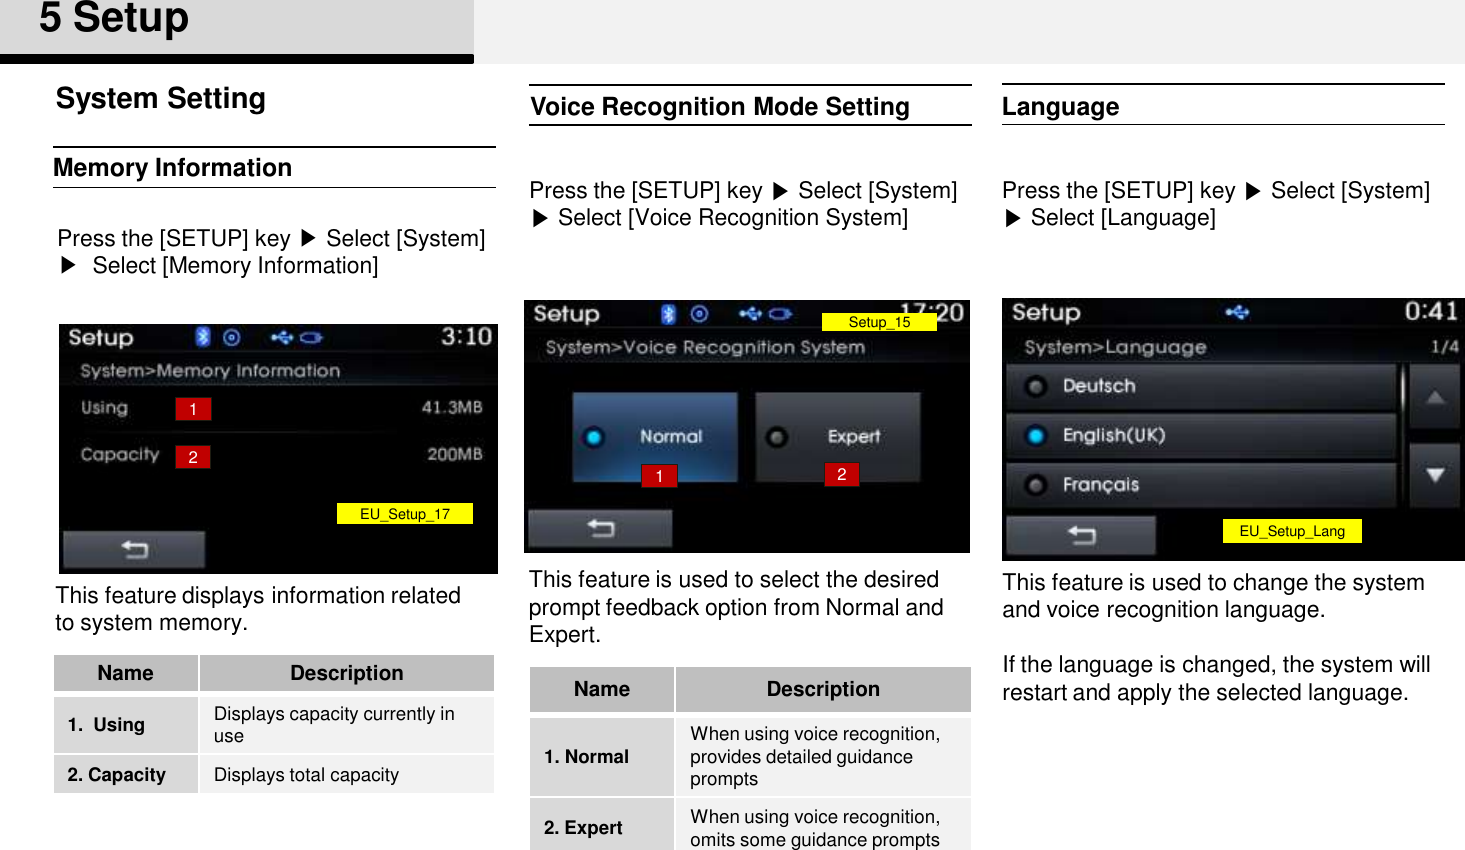 Voice Recognition Mode SettingPress the [SETUP] key ▶Select [System] ▶Select [Voice Recognition System]This feature is used to select the desired  prompt feedback option from Normal and Expert. Memory InformationPress the [SETUP] key ▶Select [System]▶Select [Memory Information]This feature displays information related to system memory. System Setting5 SetupNameDescription1. Normal When using voice recognition, provides detailed guidance prompts2. Expert When using voice recognition, omits some guidance prompts NameDescription1.  Using Displays capacity currently in use2. Capacity Displays total capacity12Setup_1512EU_Setup_17LanguagePress the [SETUP] key ▶Select [System] ▶Select [Language]This feature is used to change the system and voice recognition language. If the language is changed, the system will restart and apply the selected language.EU_Setup_Lang